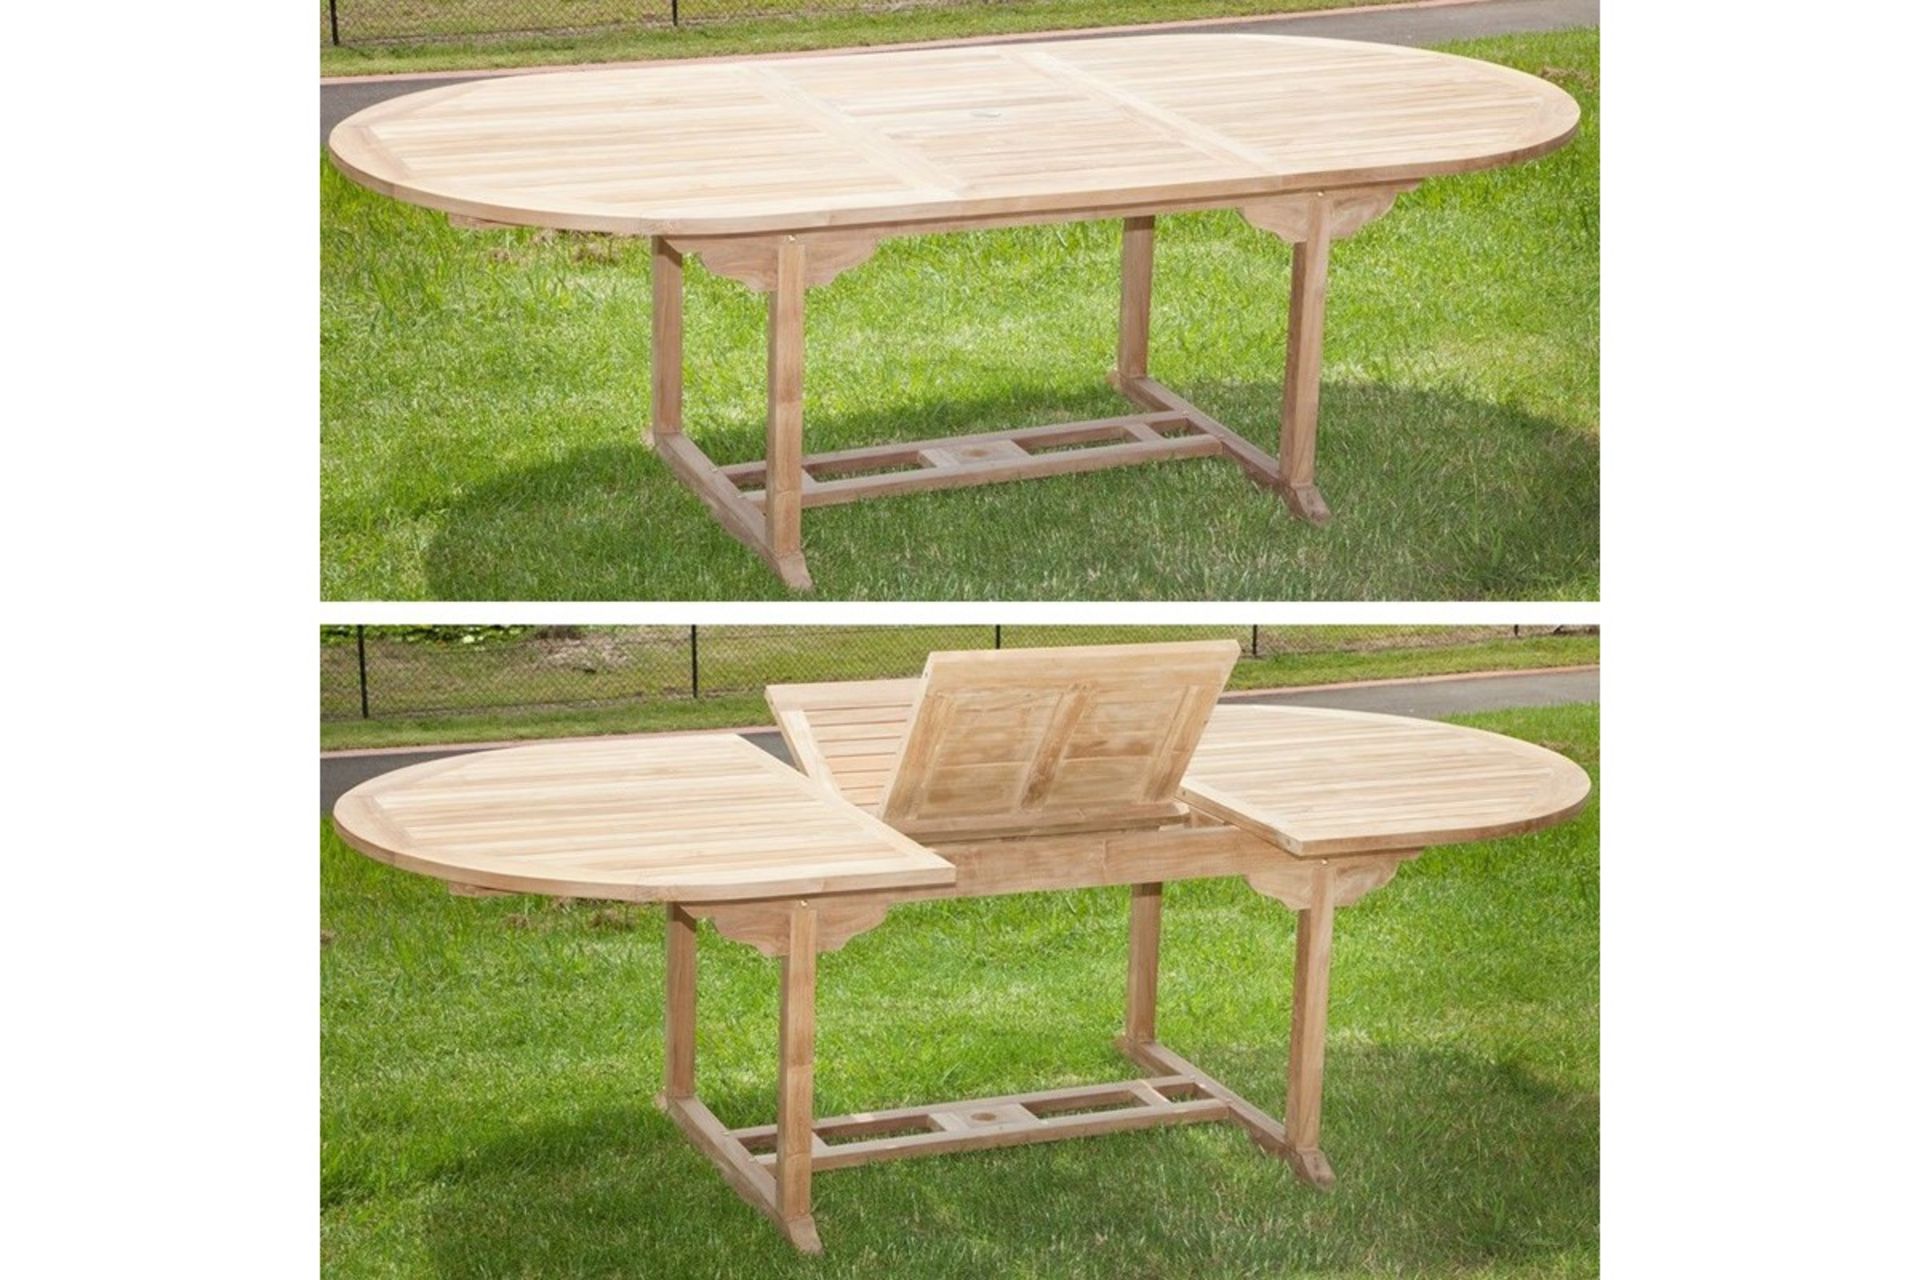 V Brand New Teak Extended Table Allows For Up To 8 People To Sit NOTE: Item will not be available